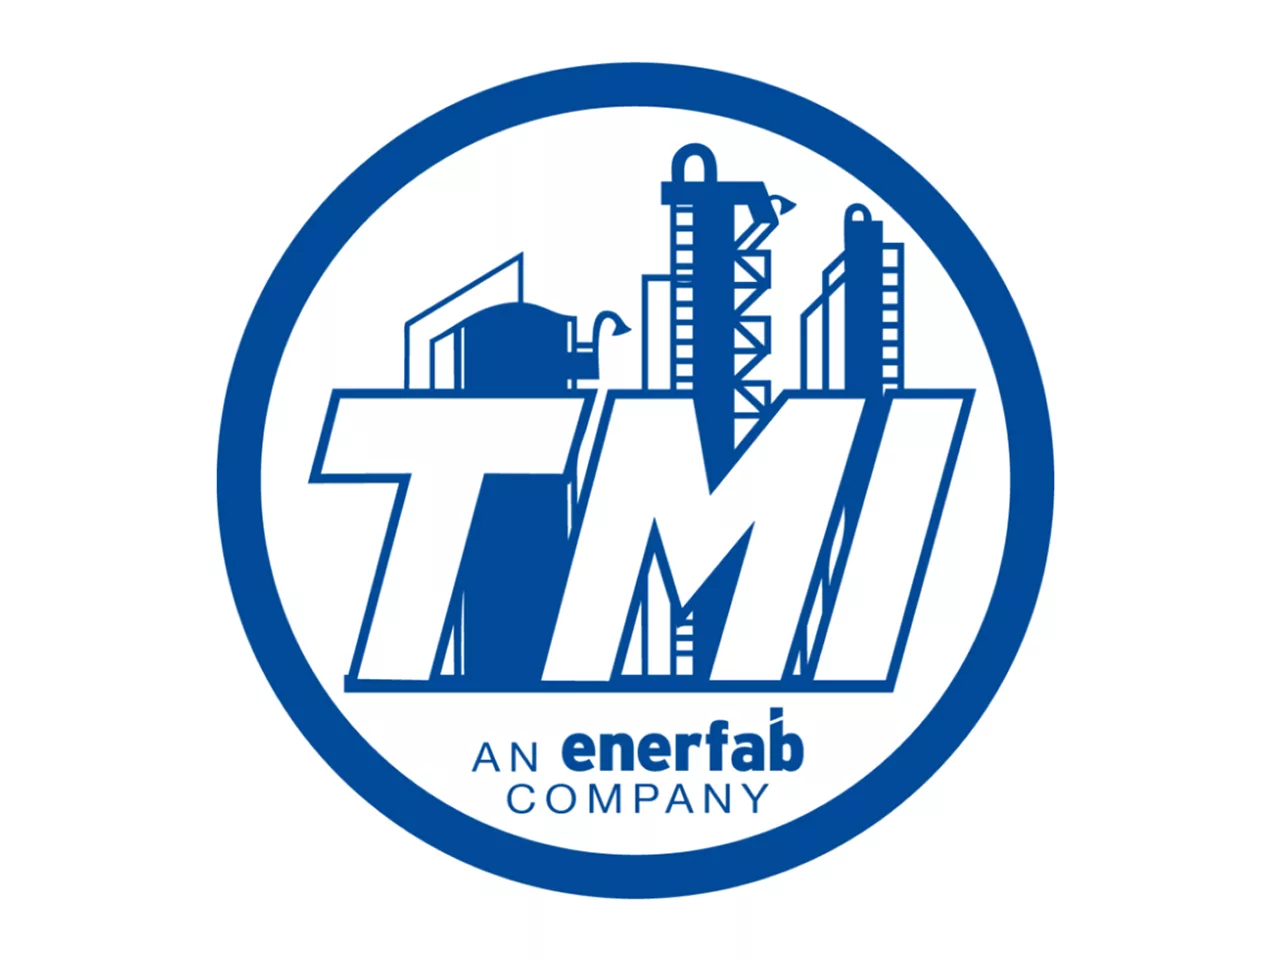 Enerfab Acquires TMI Contractors as Part of Its Ongoing Growth & Diversification Strategy